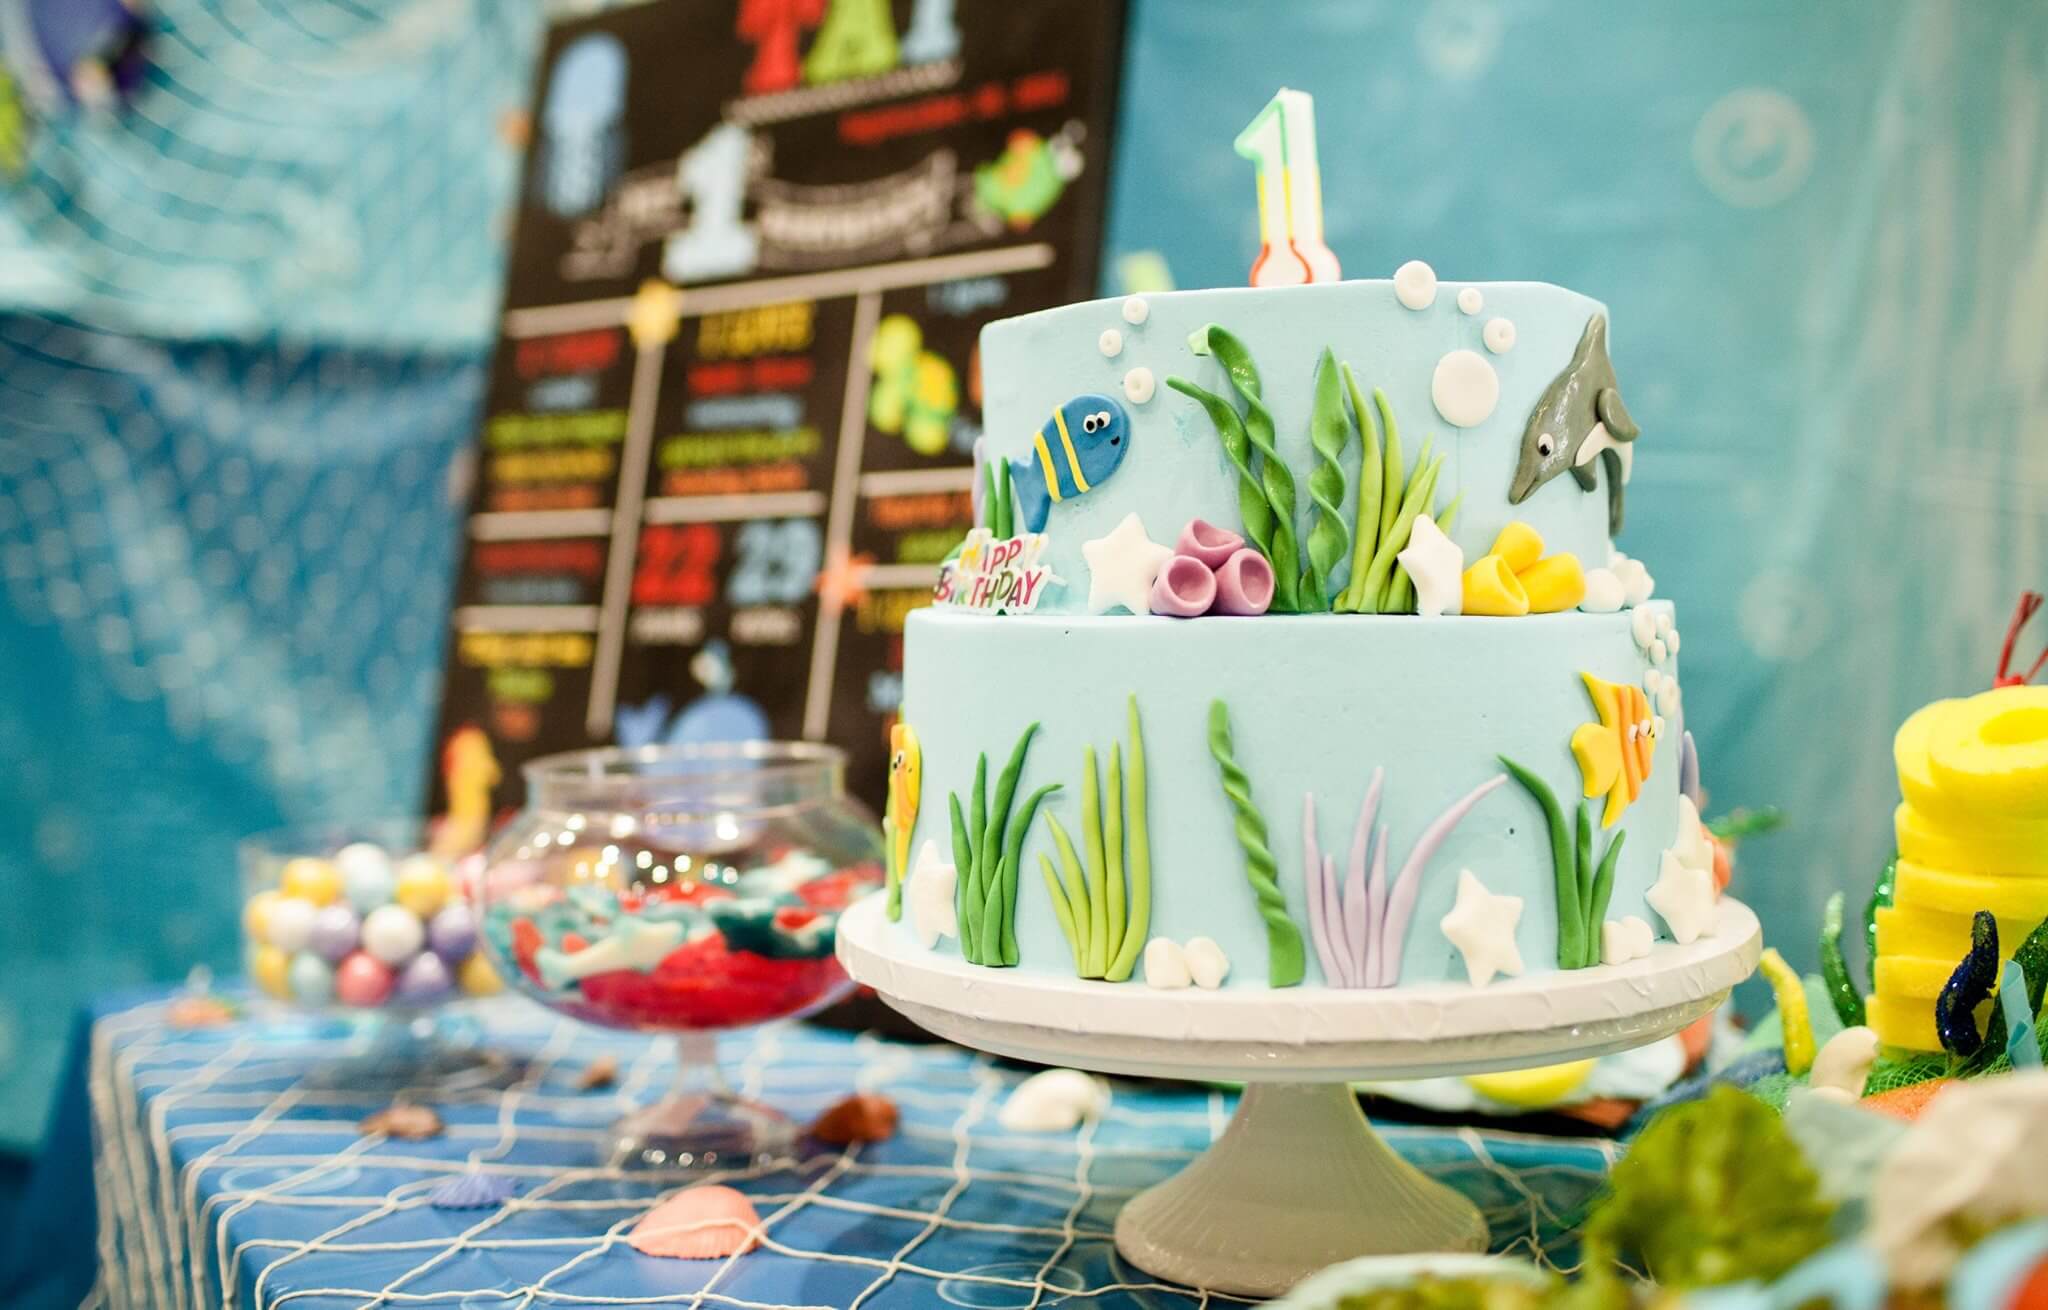 Under The Sea First Birthday Party Ideas That Will Make A Splash